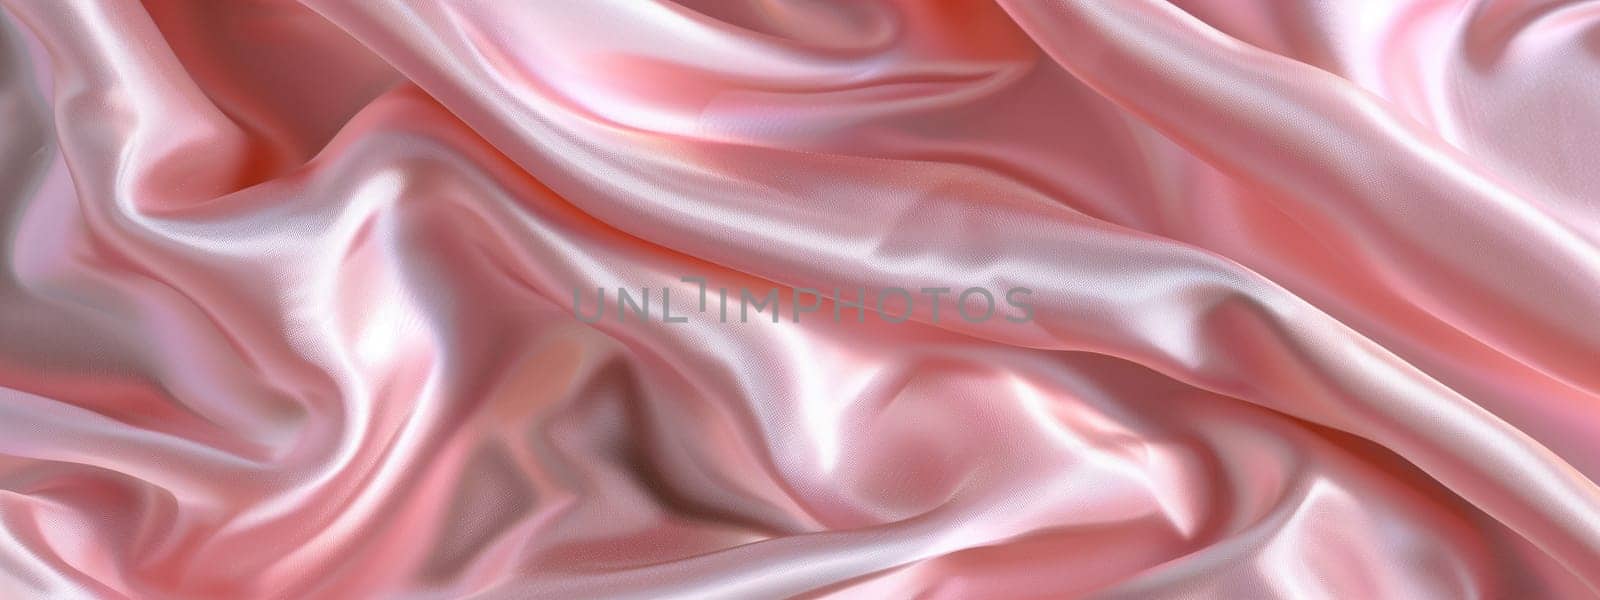 A detailed close up of a luxurious pink satin fabric, showcasing the intricate patterns and textures resembling delicate flower petals in shades of magenta and violet